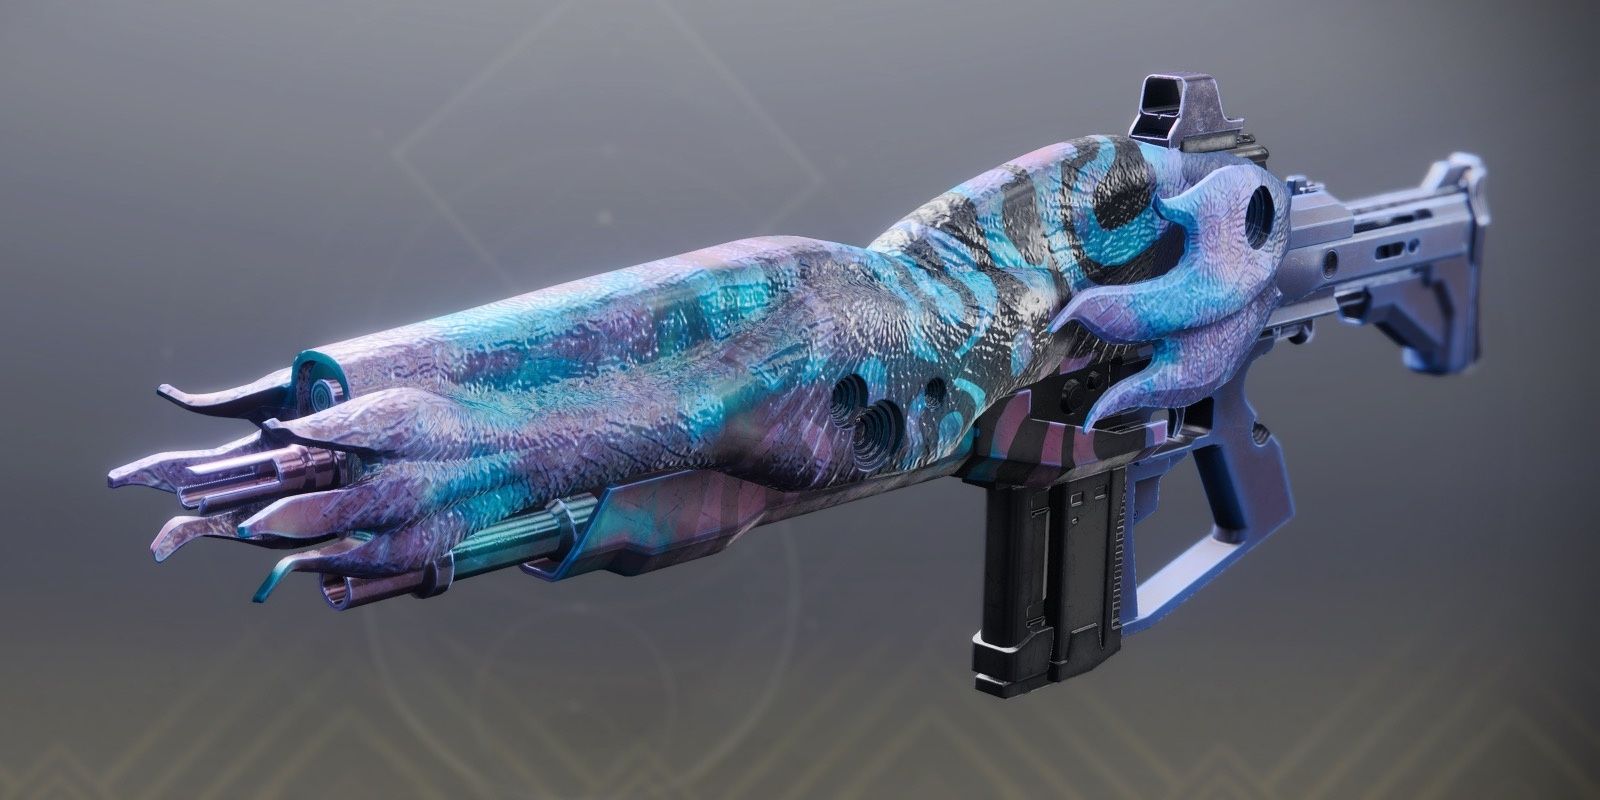 The Auto Rifle Rufus's Fury glows with purple and teal swirls on a gray background.